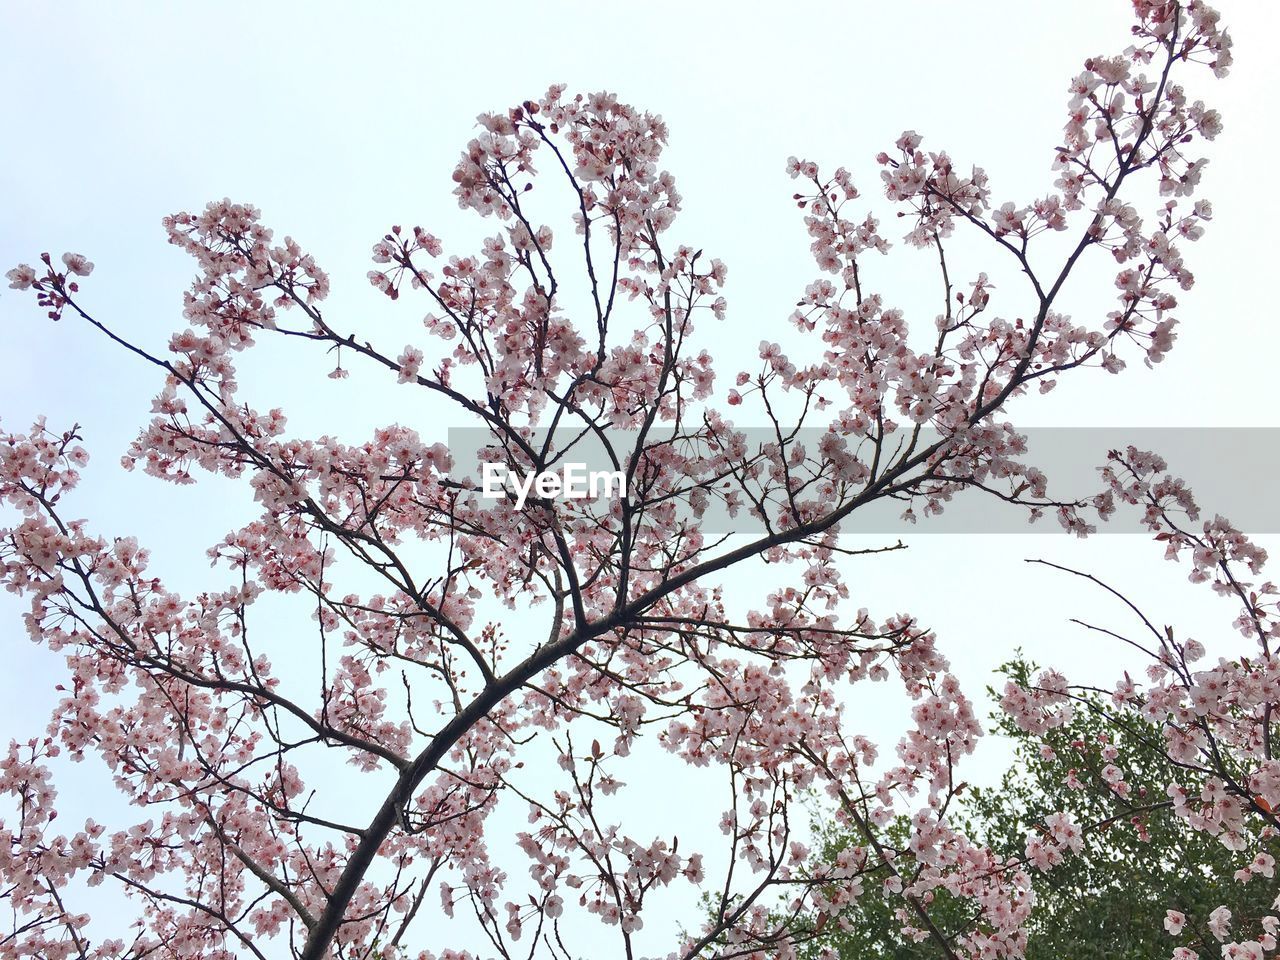 Low angle view of pink flowers blooming on branches against sky